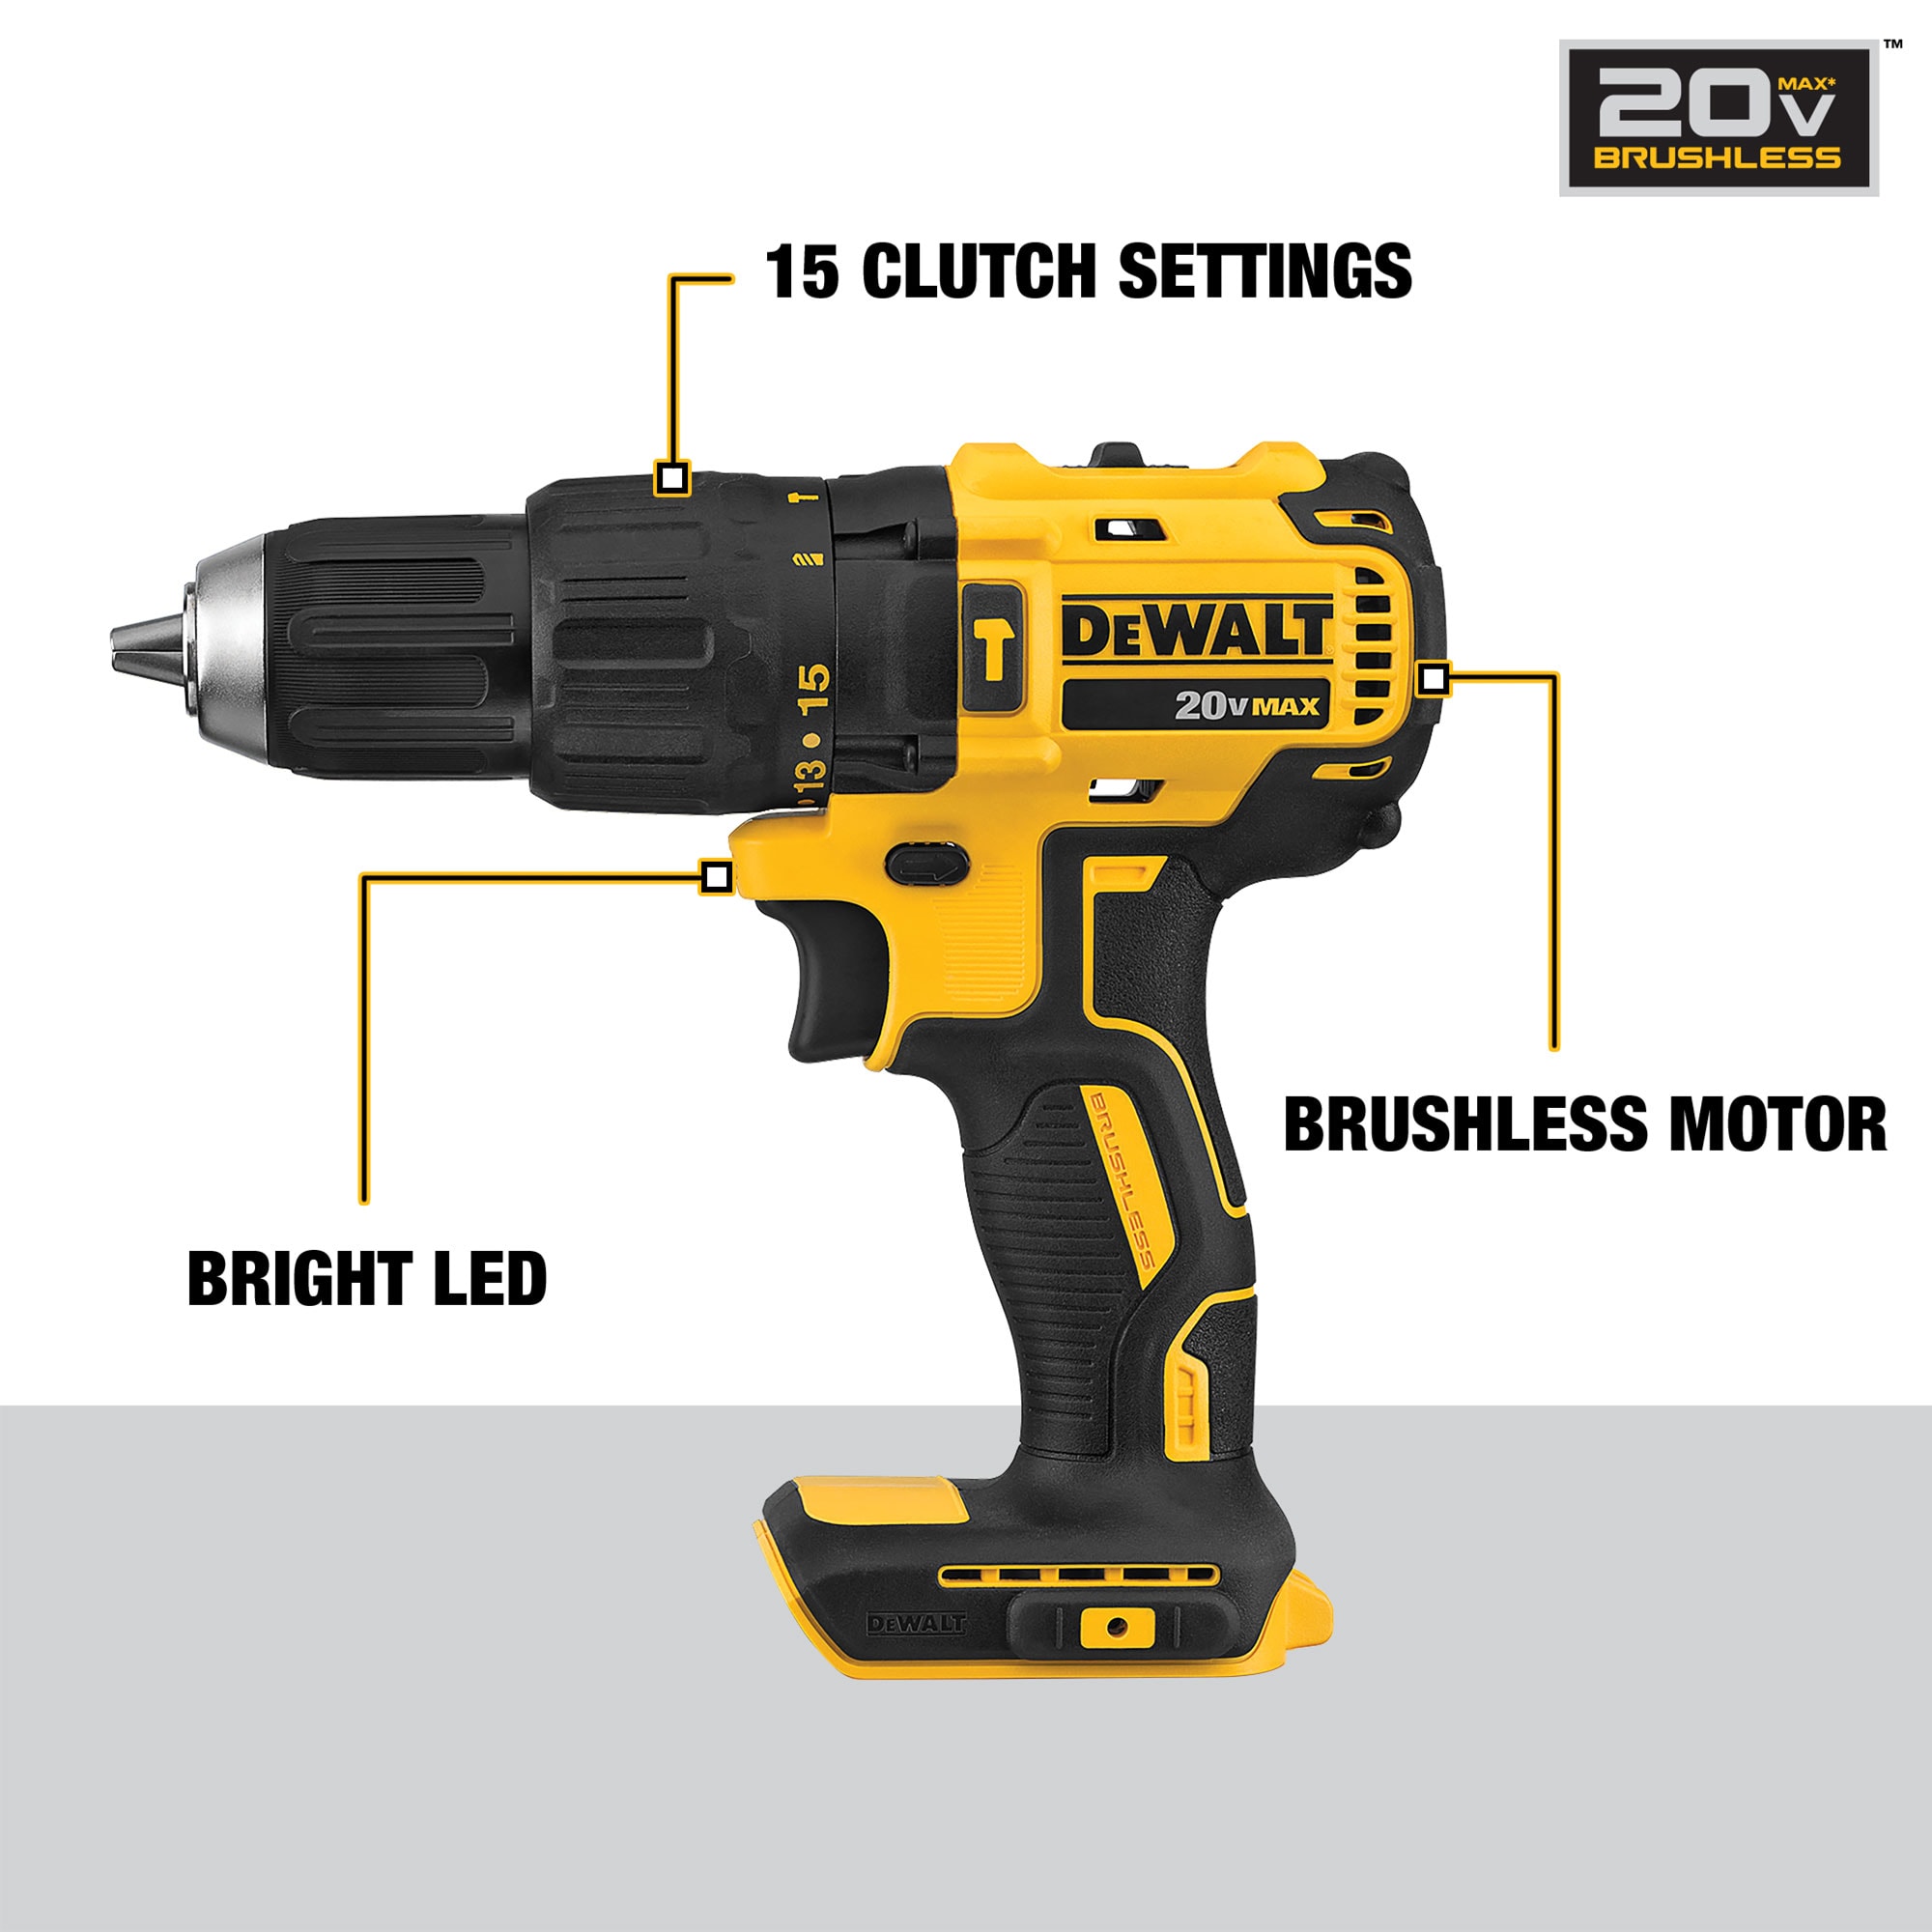 DEWALT 1/2-in 20-volt Max-Amp Variable Brushless Cordless Hammer (Bare Tool) in Hammer Drills department at Lowes.com